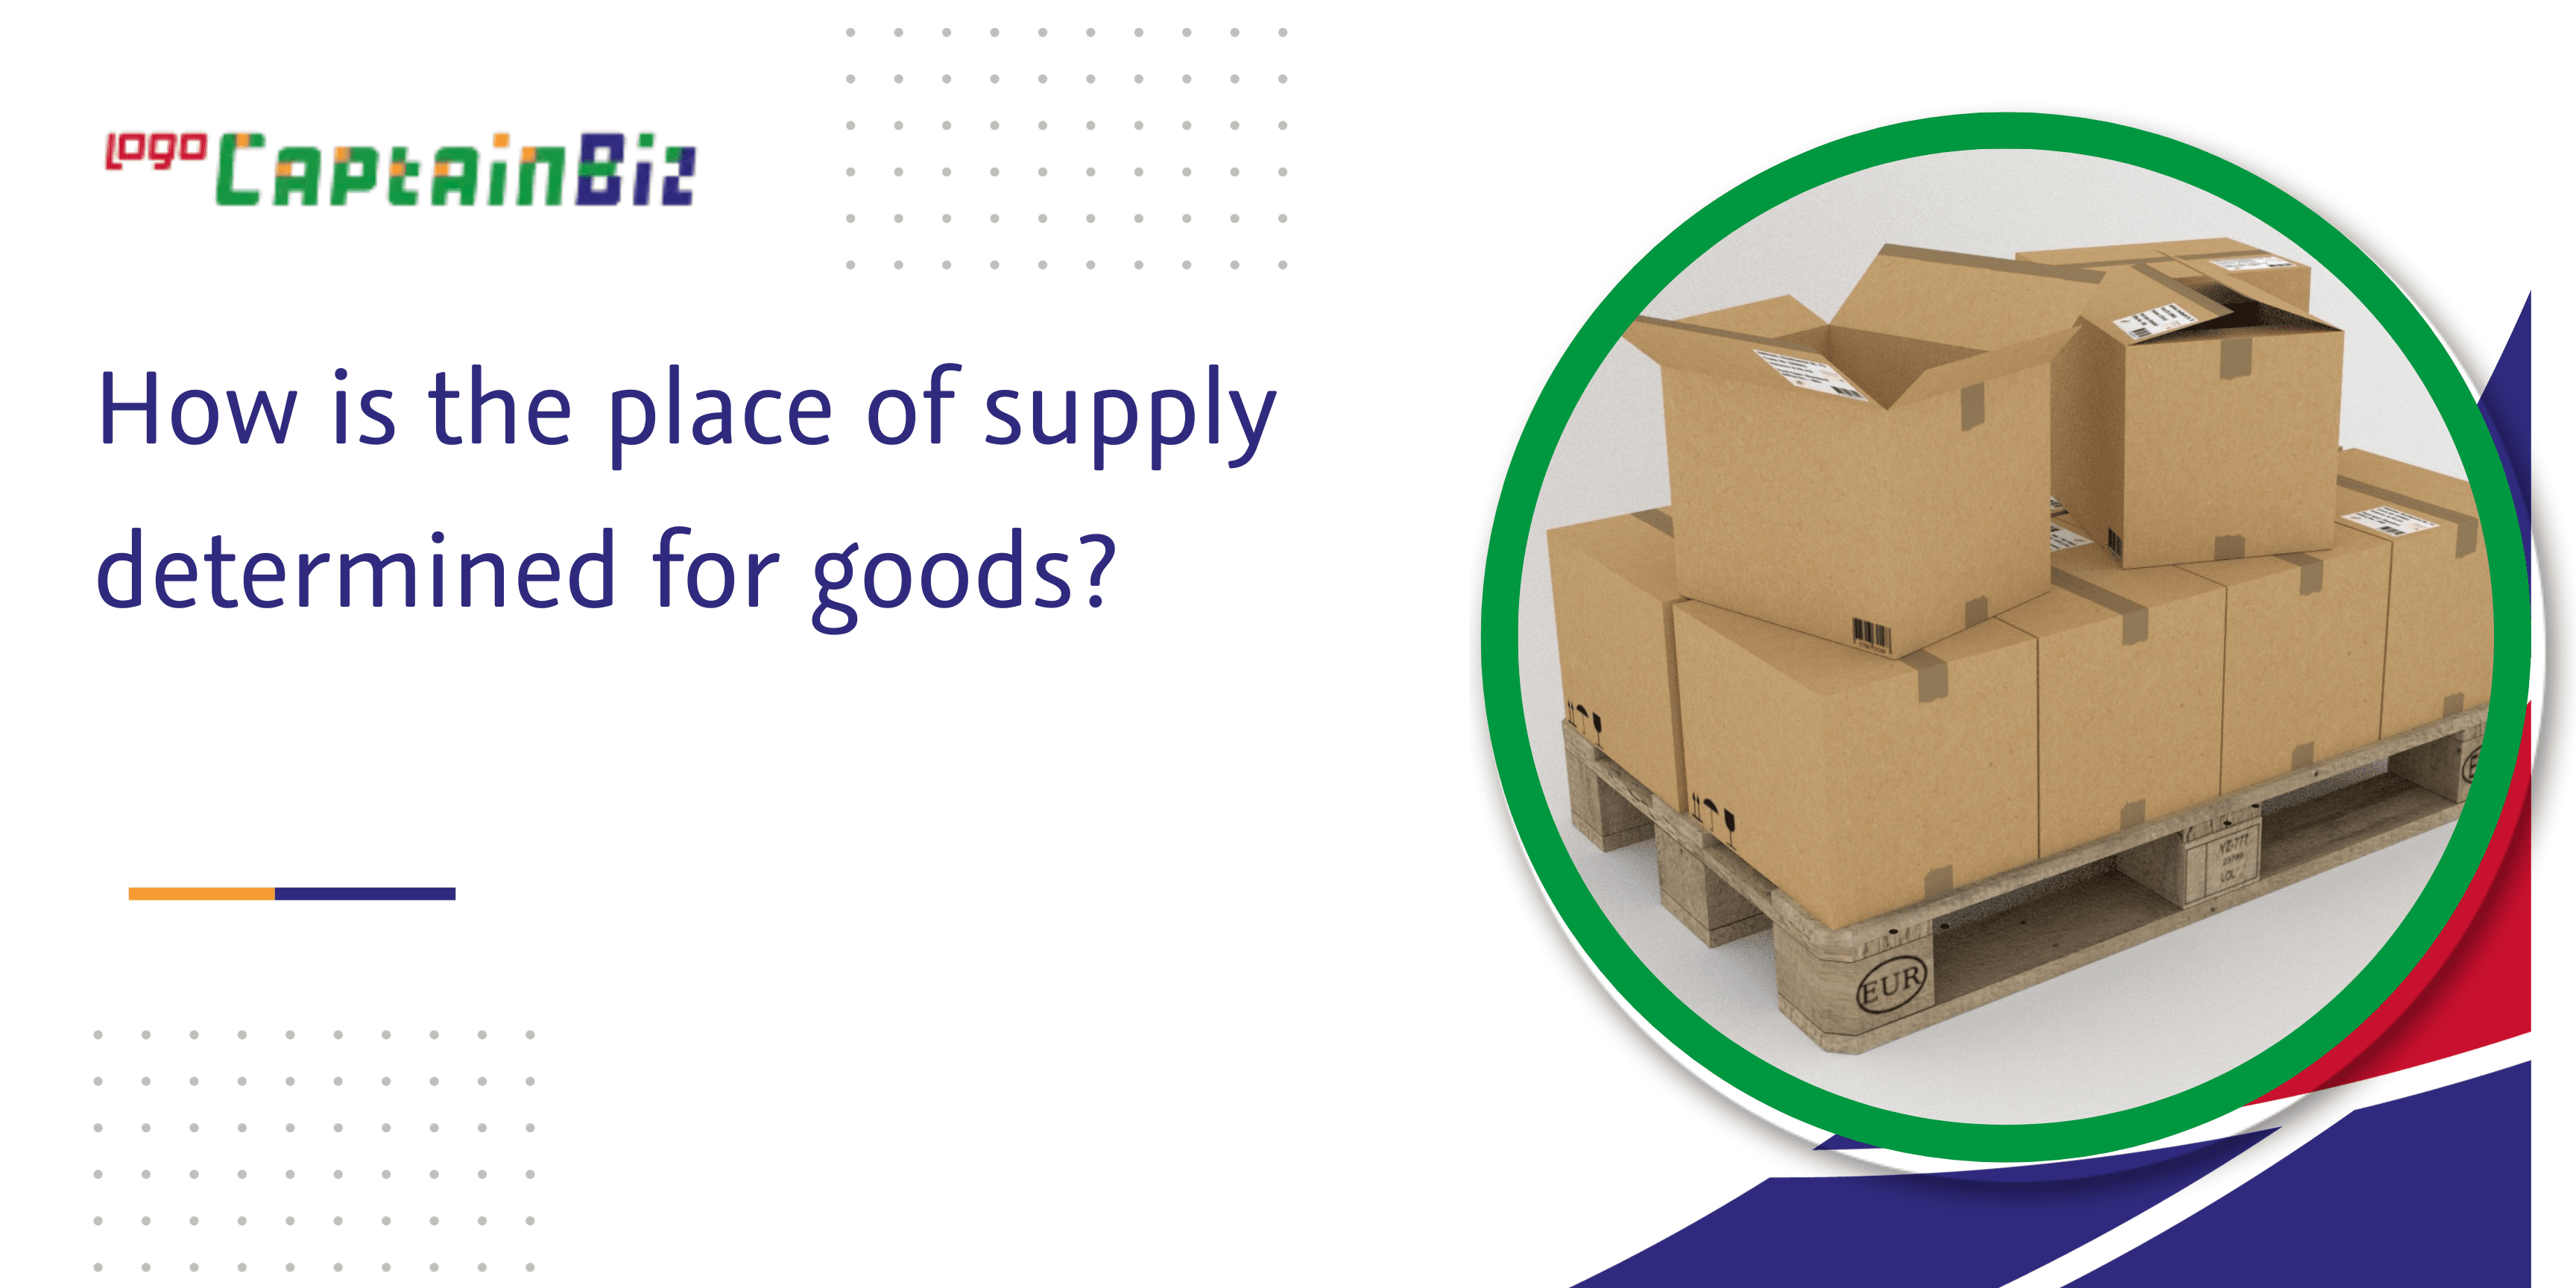 How is the place of supply determined for goods?